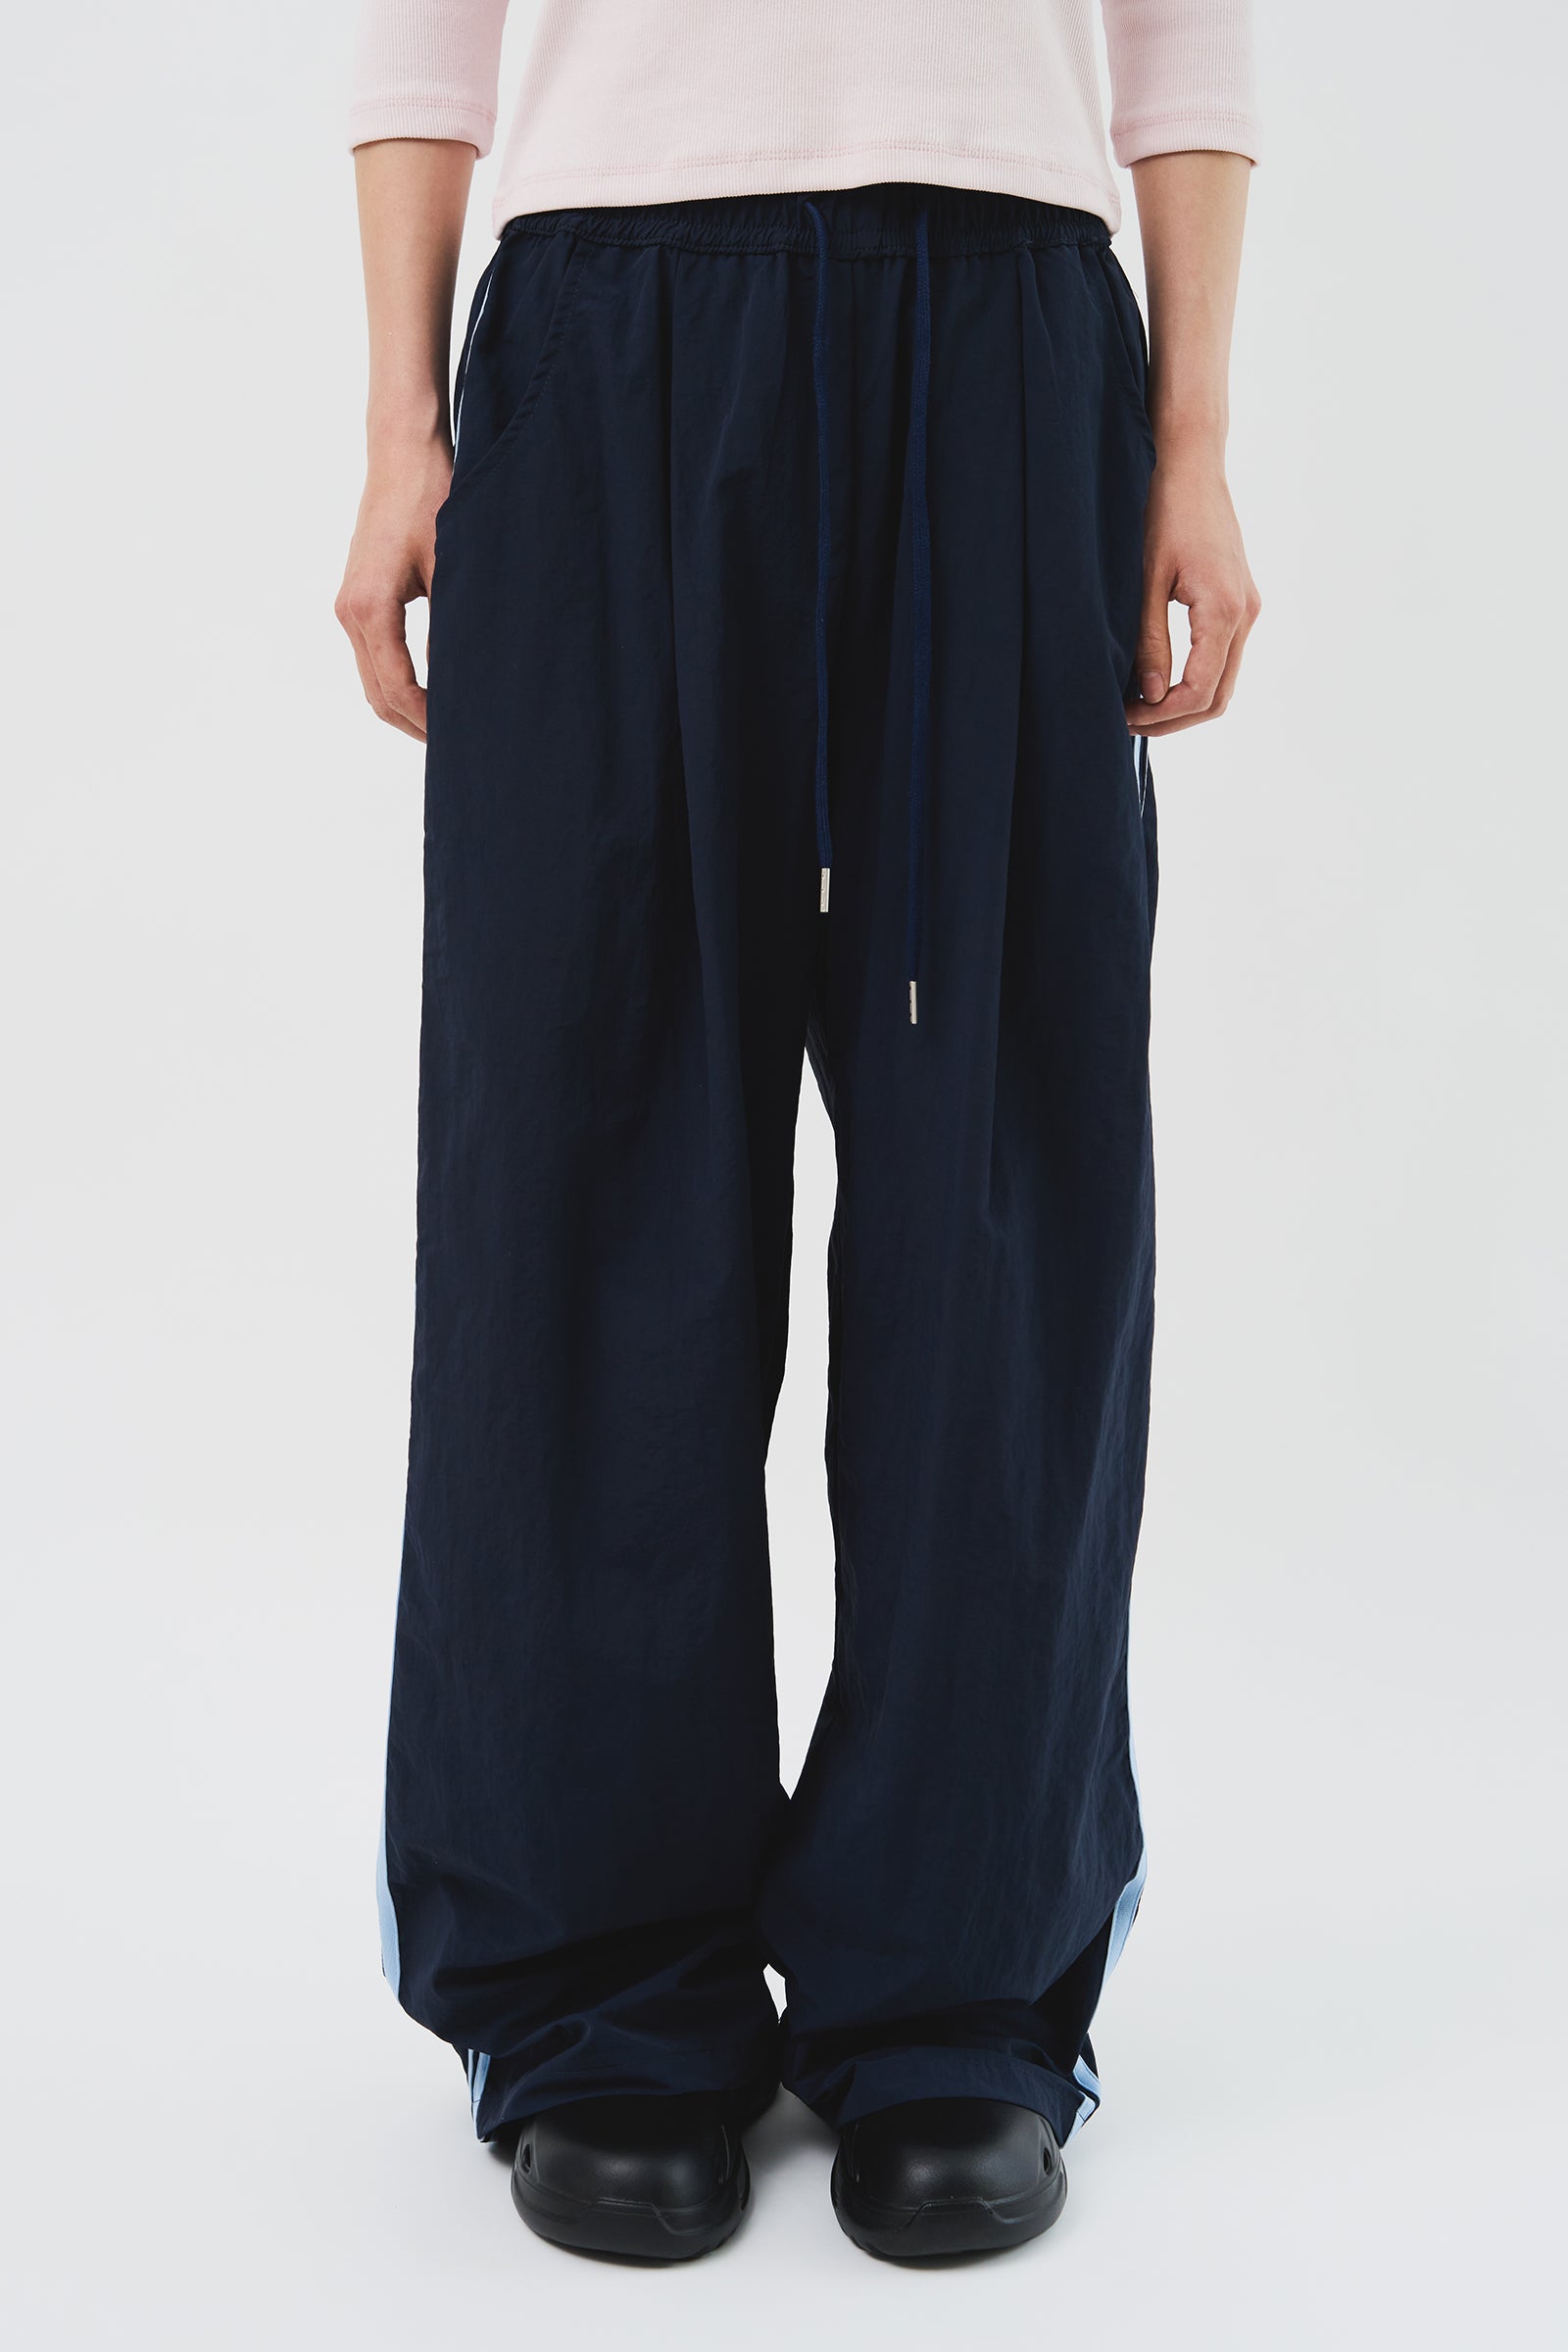 (W) Well Track Pants (2color)